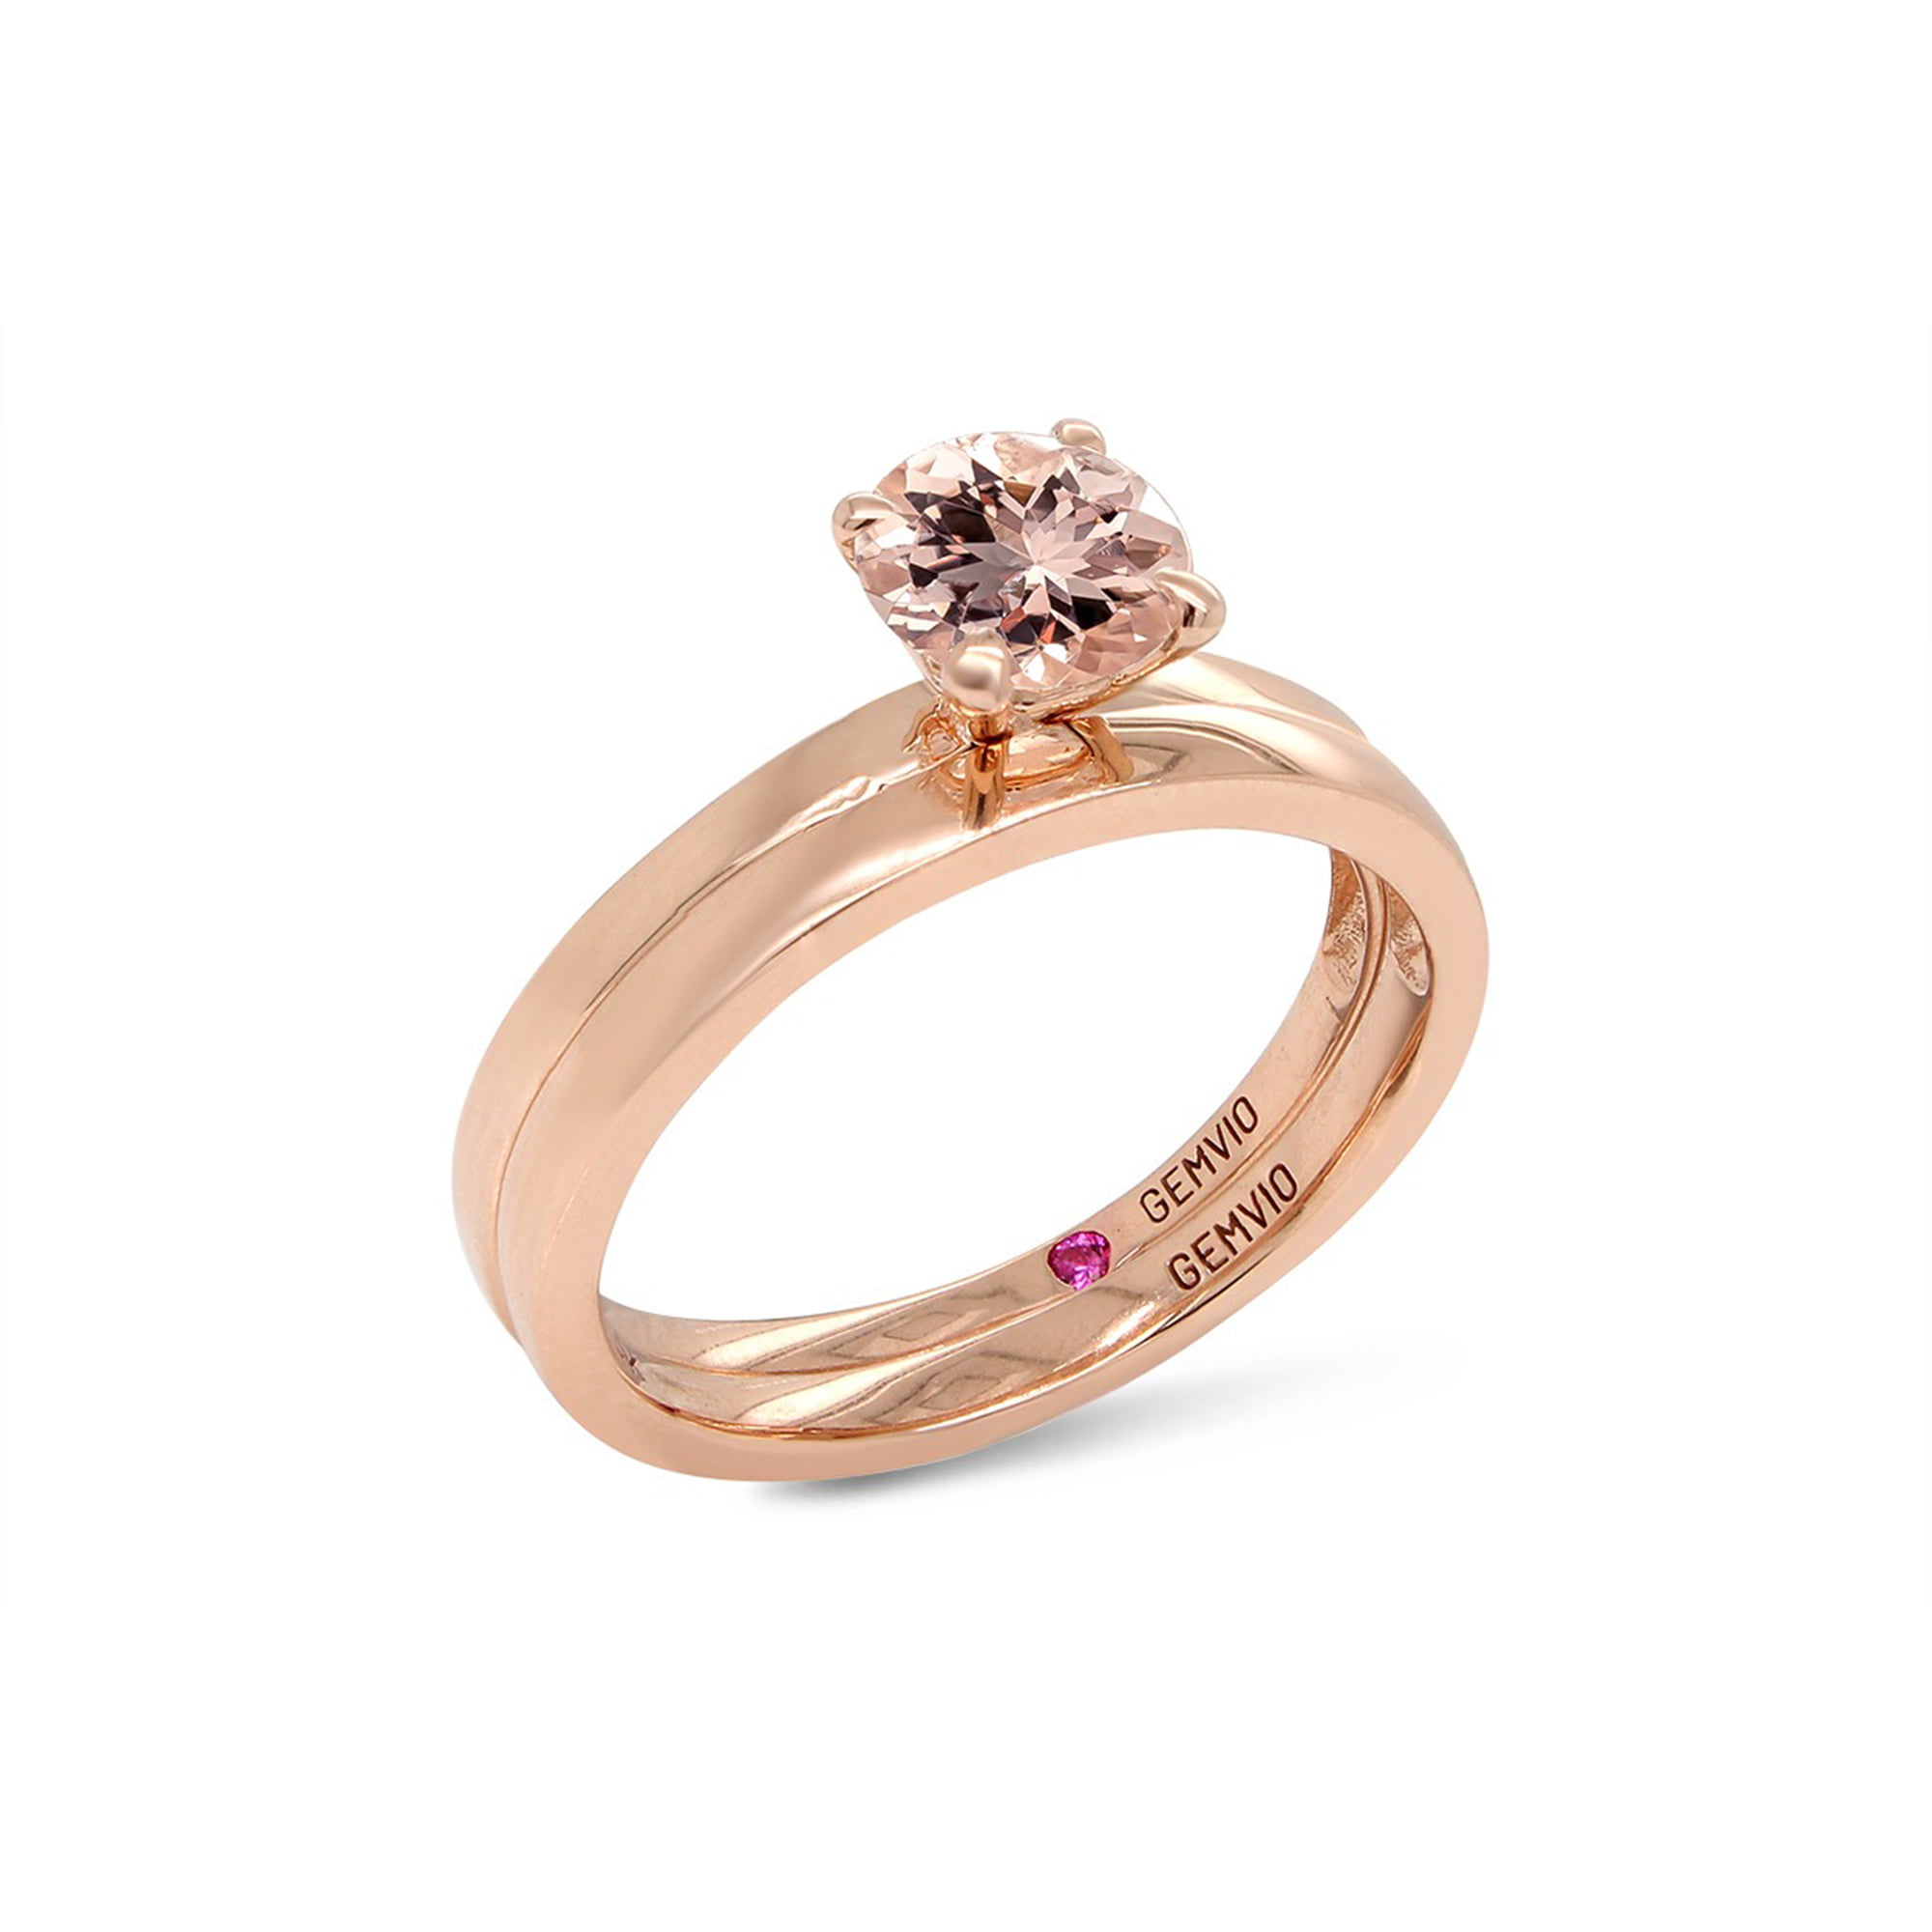 Wishrocks Simulated Birthstone with CZ Mens Wedding Band Ring in 14K Rose Gold Over Sterling Silver